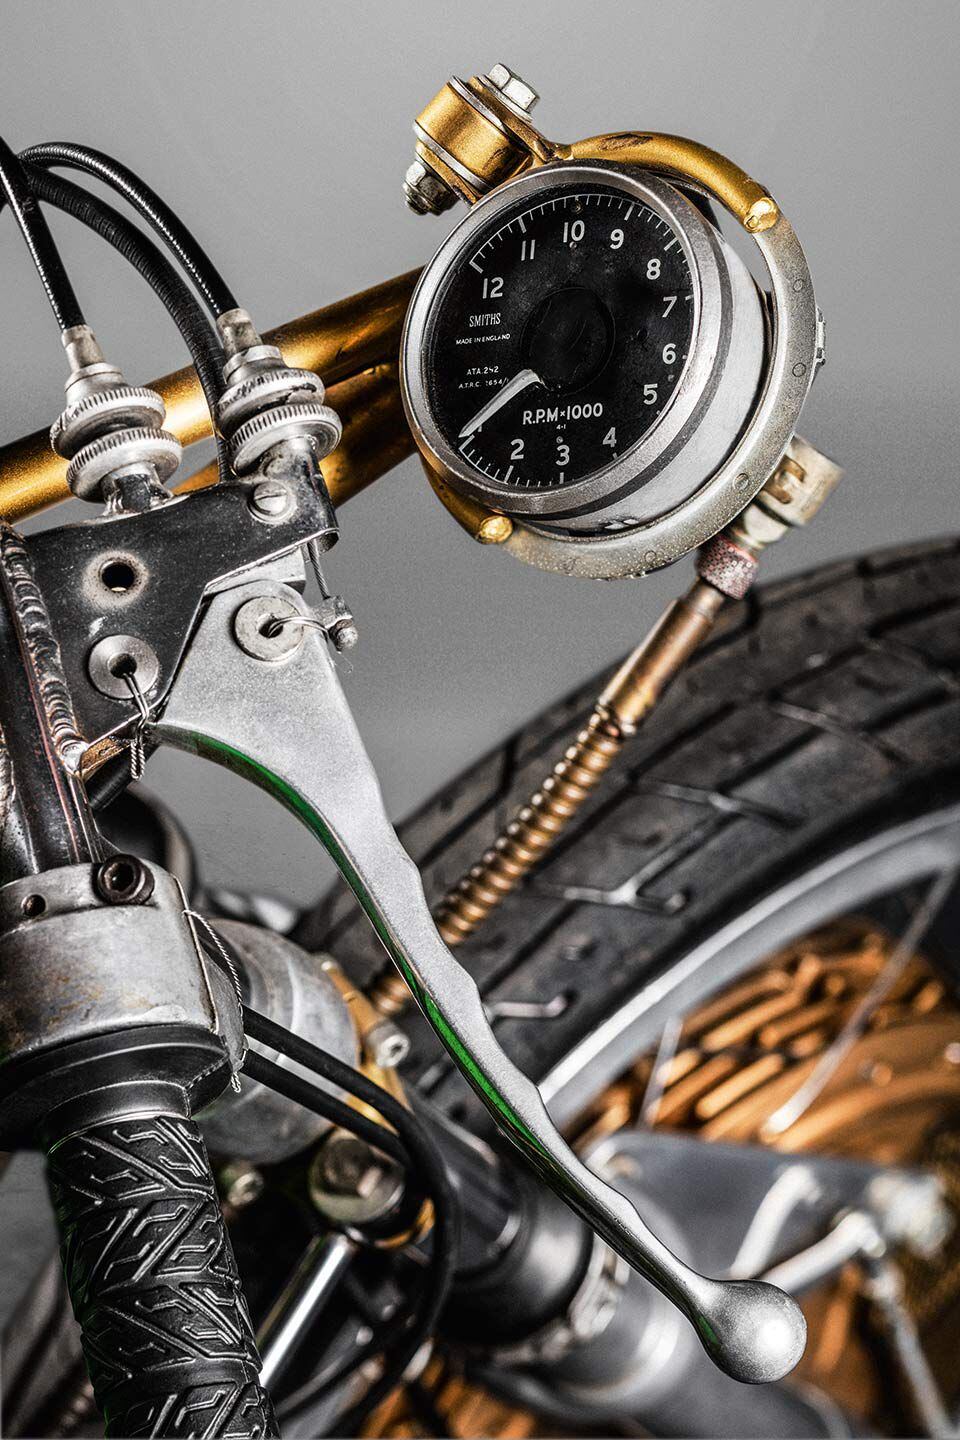 Detail of 1968 Paton 500 Bicilindrica works Grand Prix racer’s Smiths tachometer and right-side handlebar.